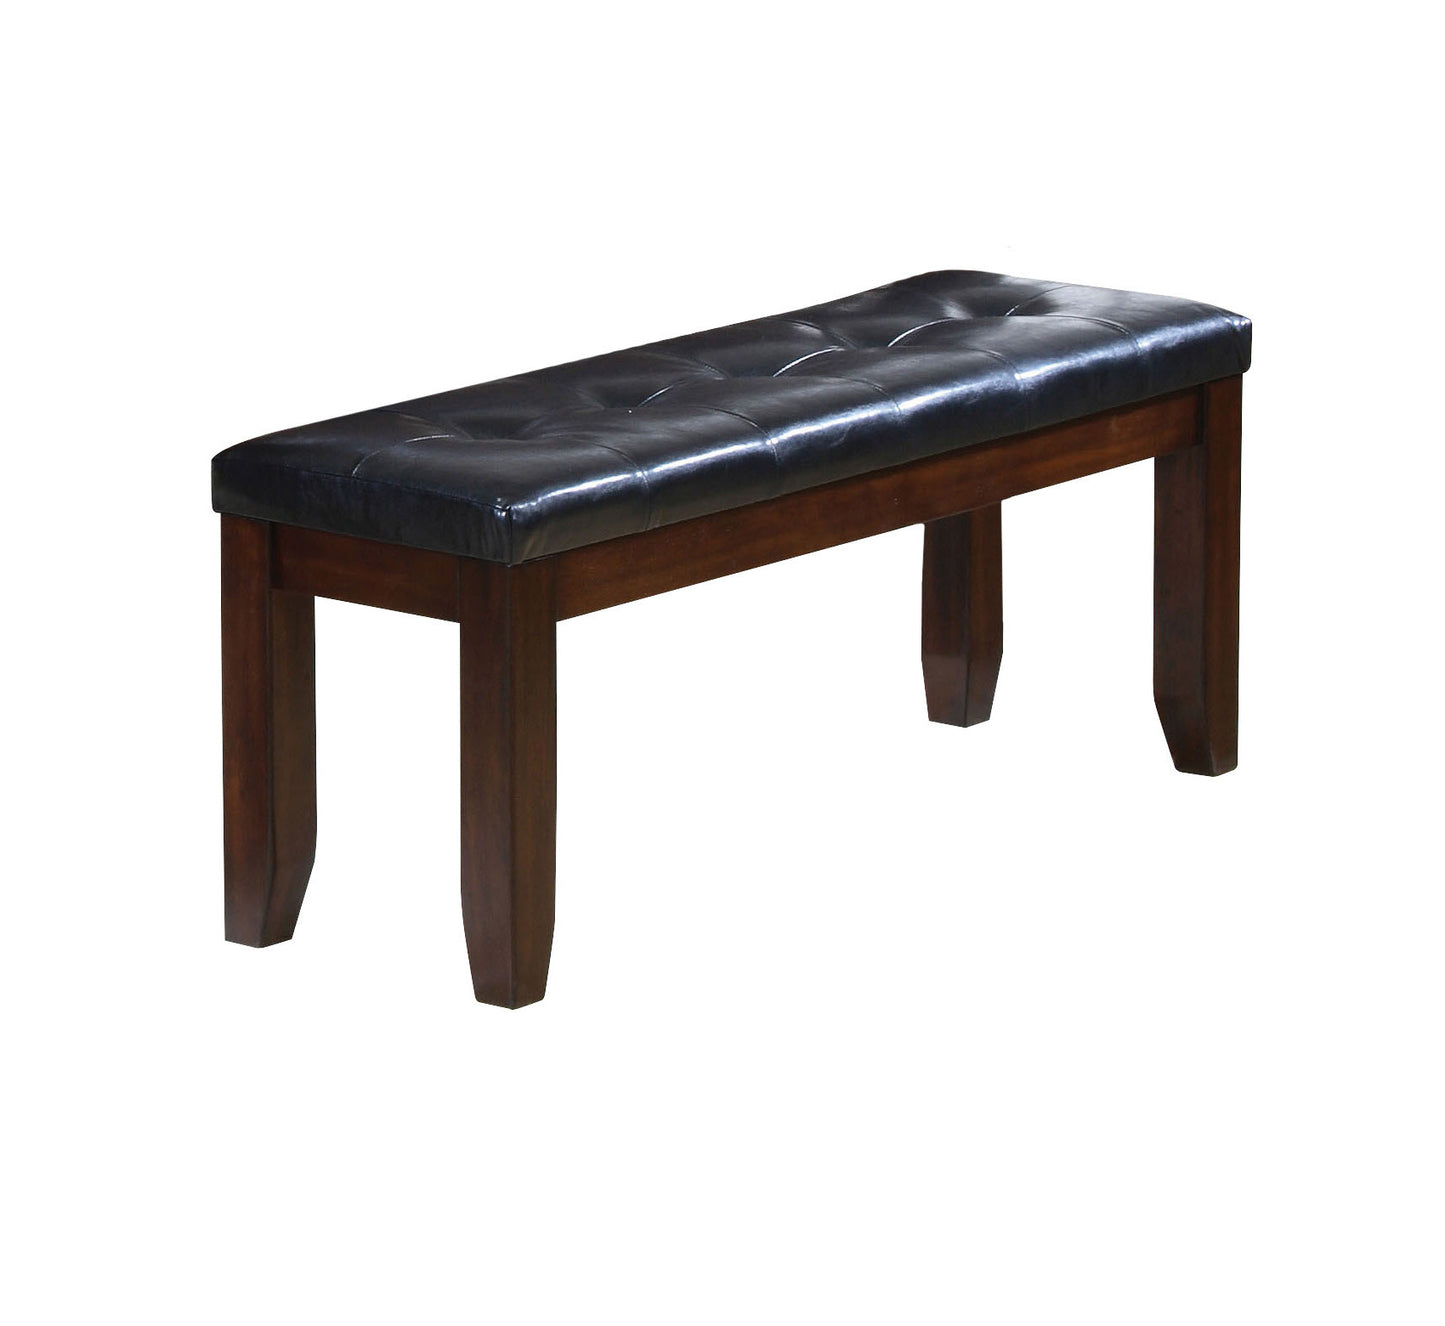 48" Black and Brown Upholstered PU Leather Bench